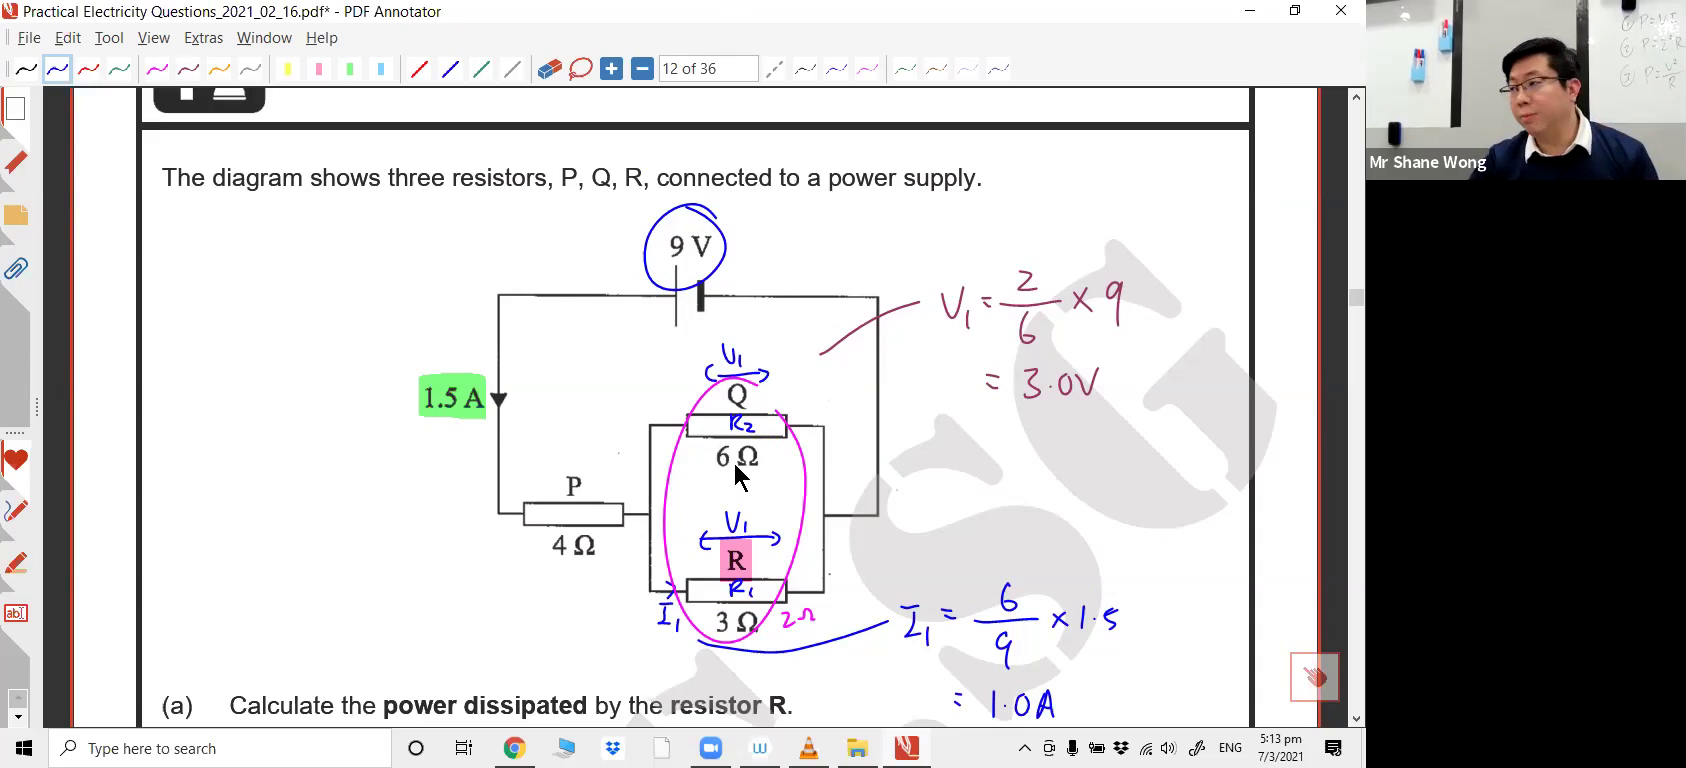 [PRACTICAL ELECTRICITY] Power